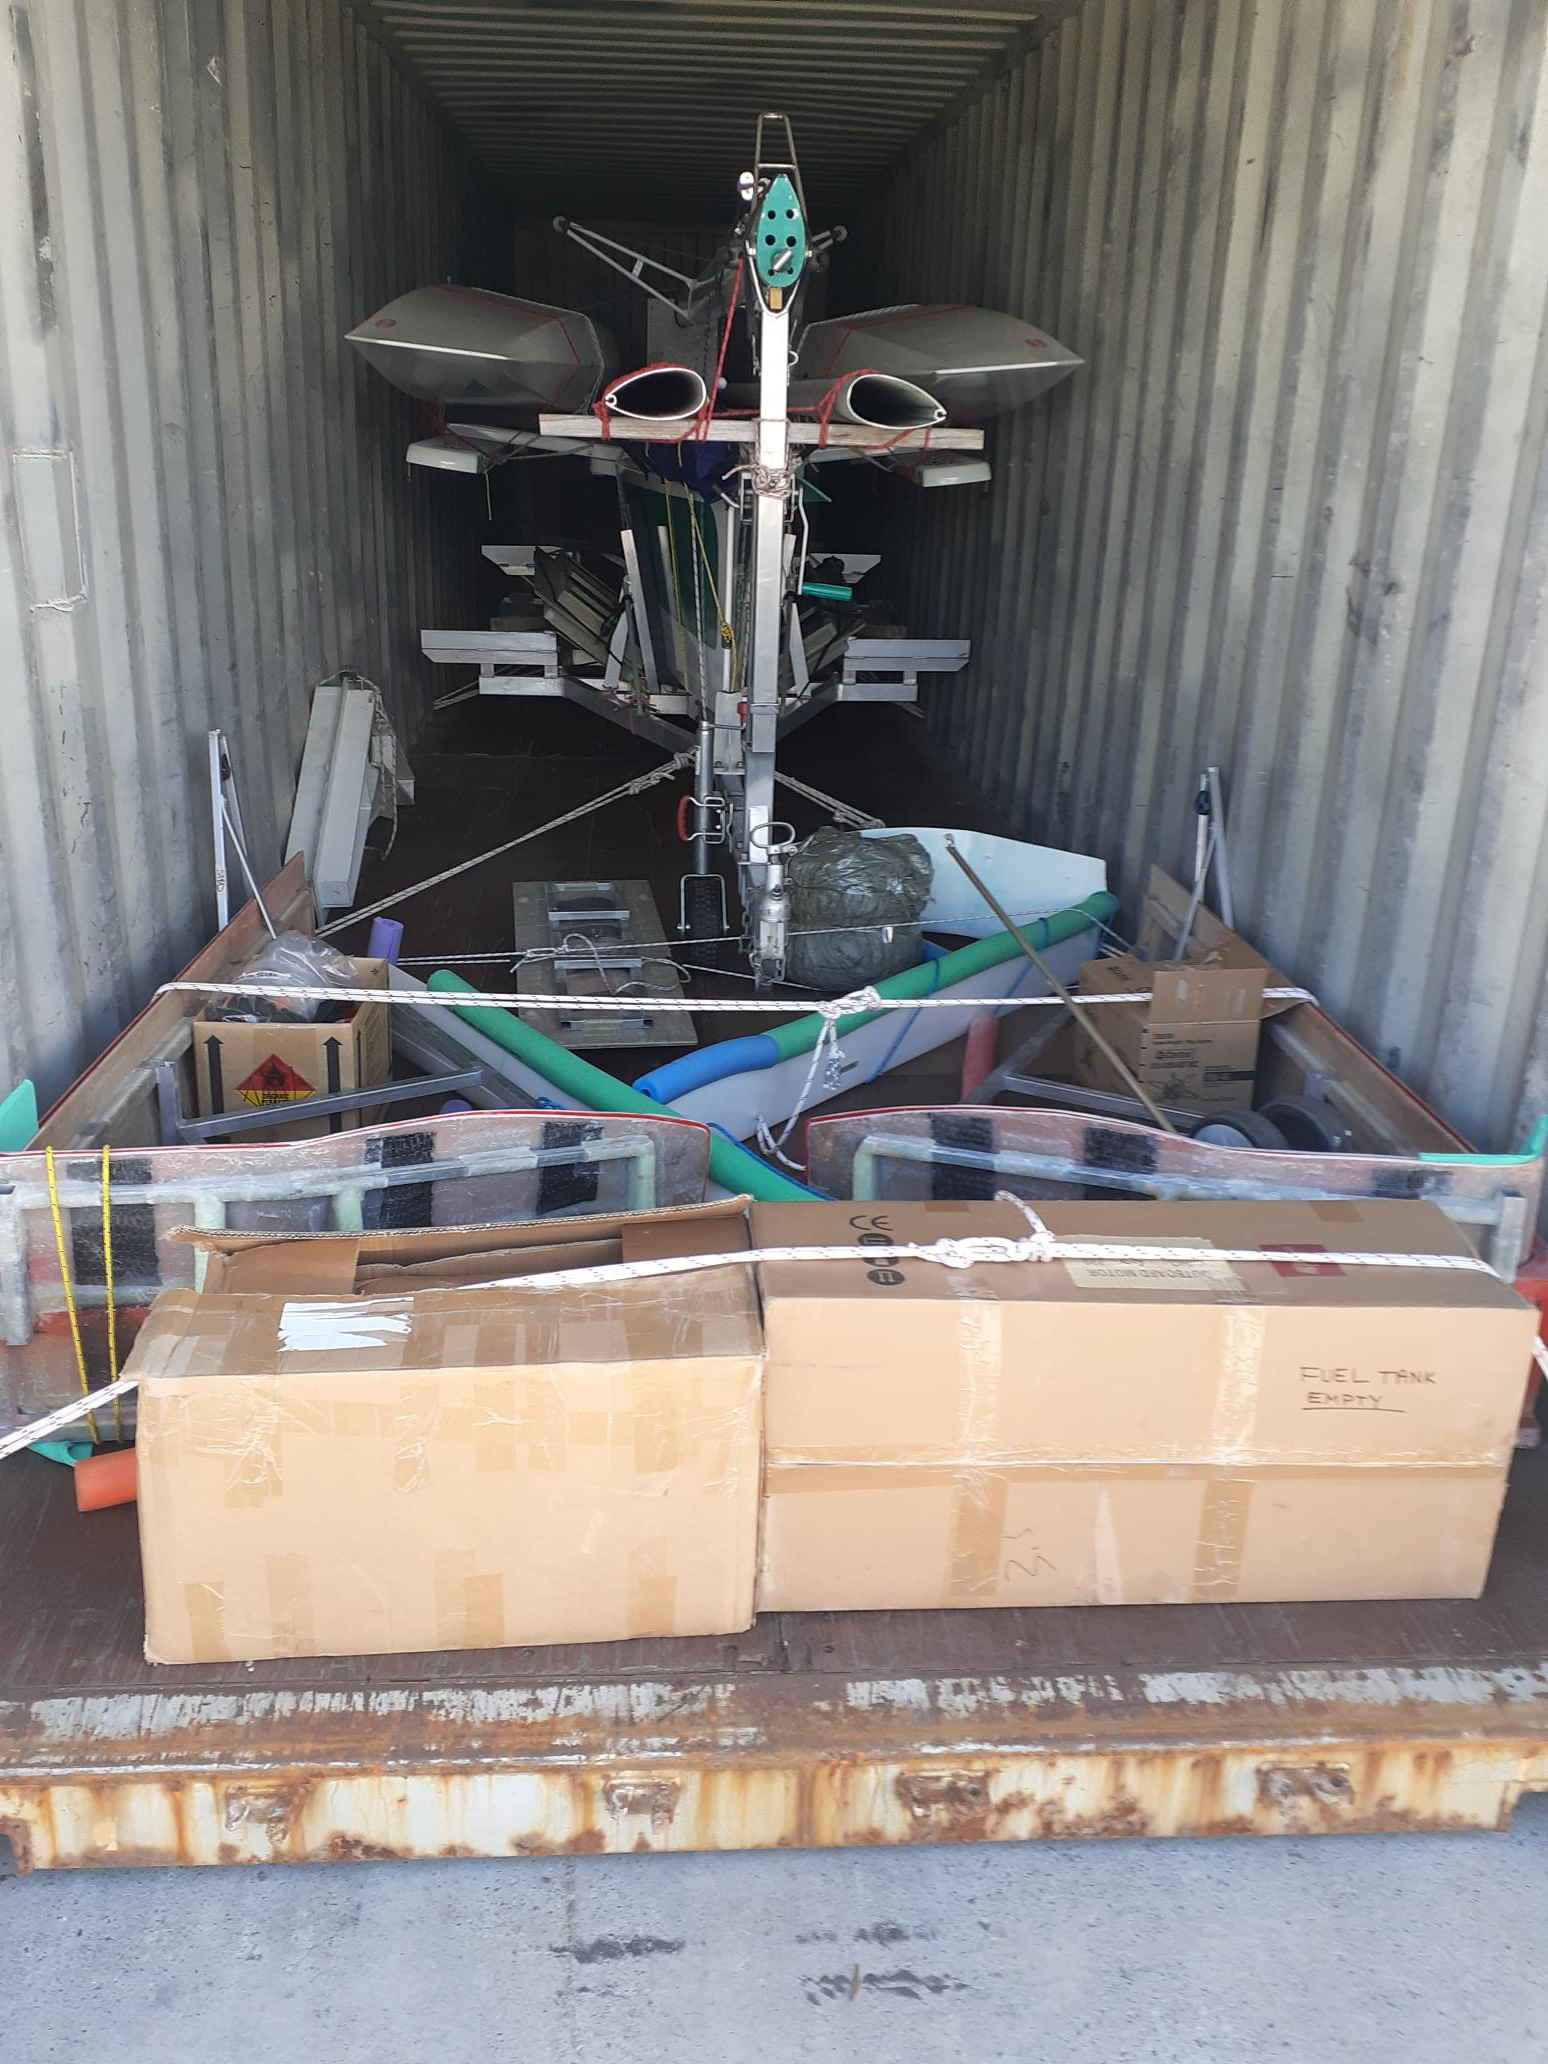 Container loaded and ready to go!